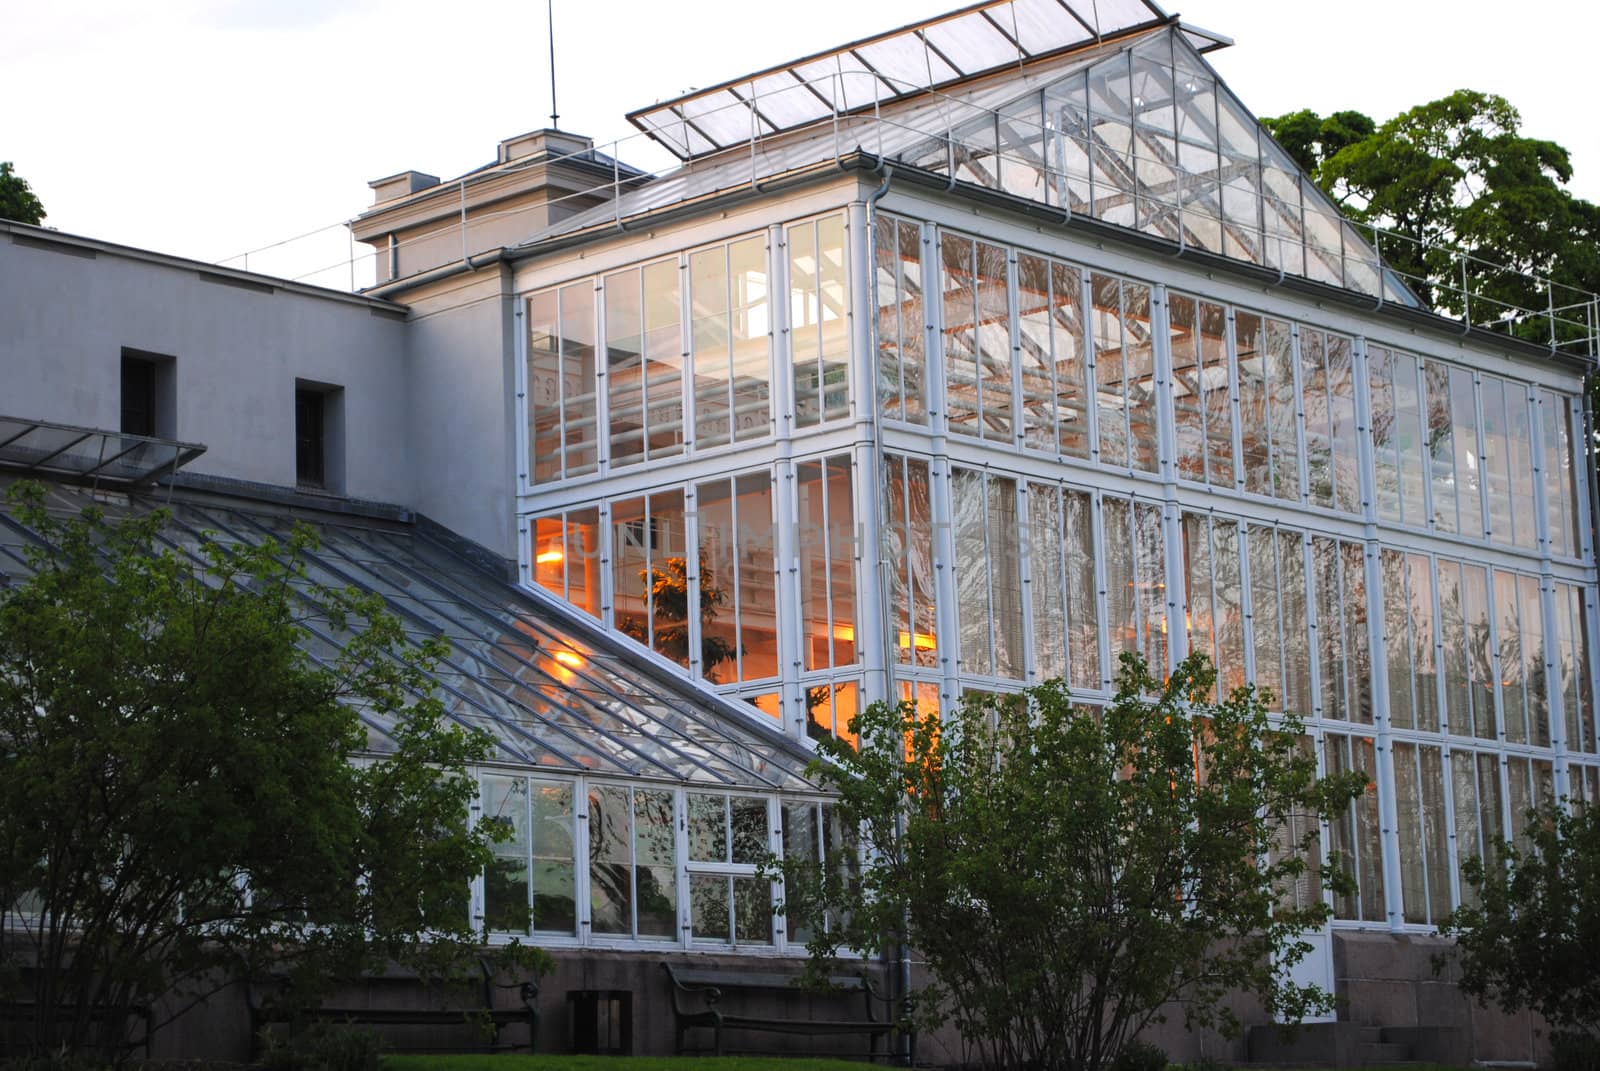 The greenhouse at The University Botanical Garden in Oslo, Norway. It is administrated by the University of Oslo.